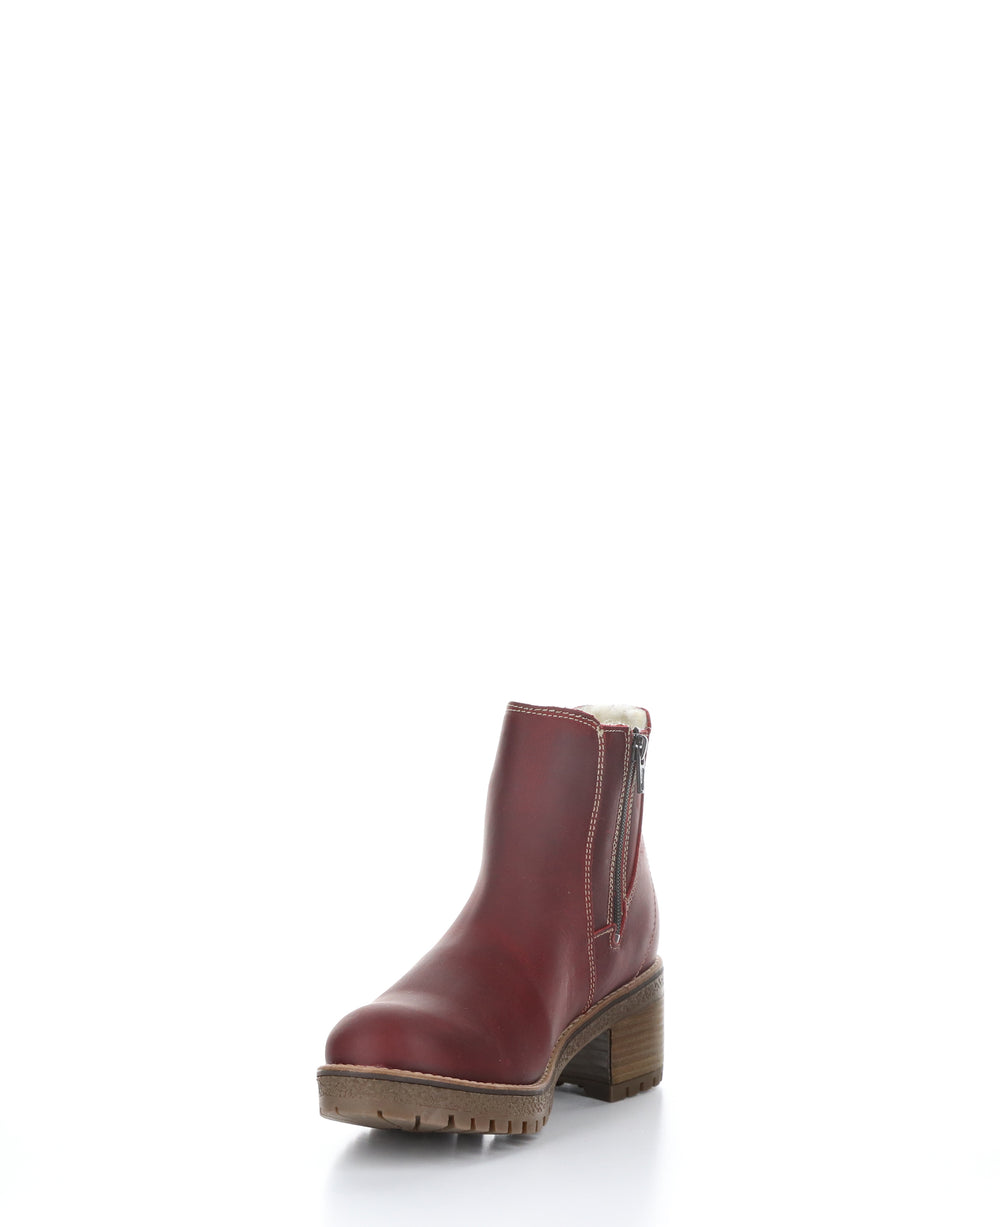 MASI Red/Dark Brown Zip Up Ankle Boots